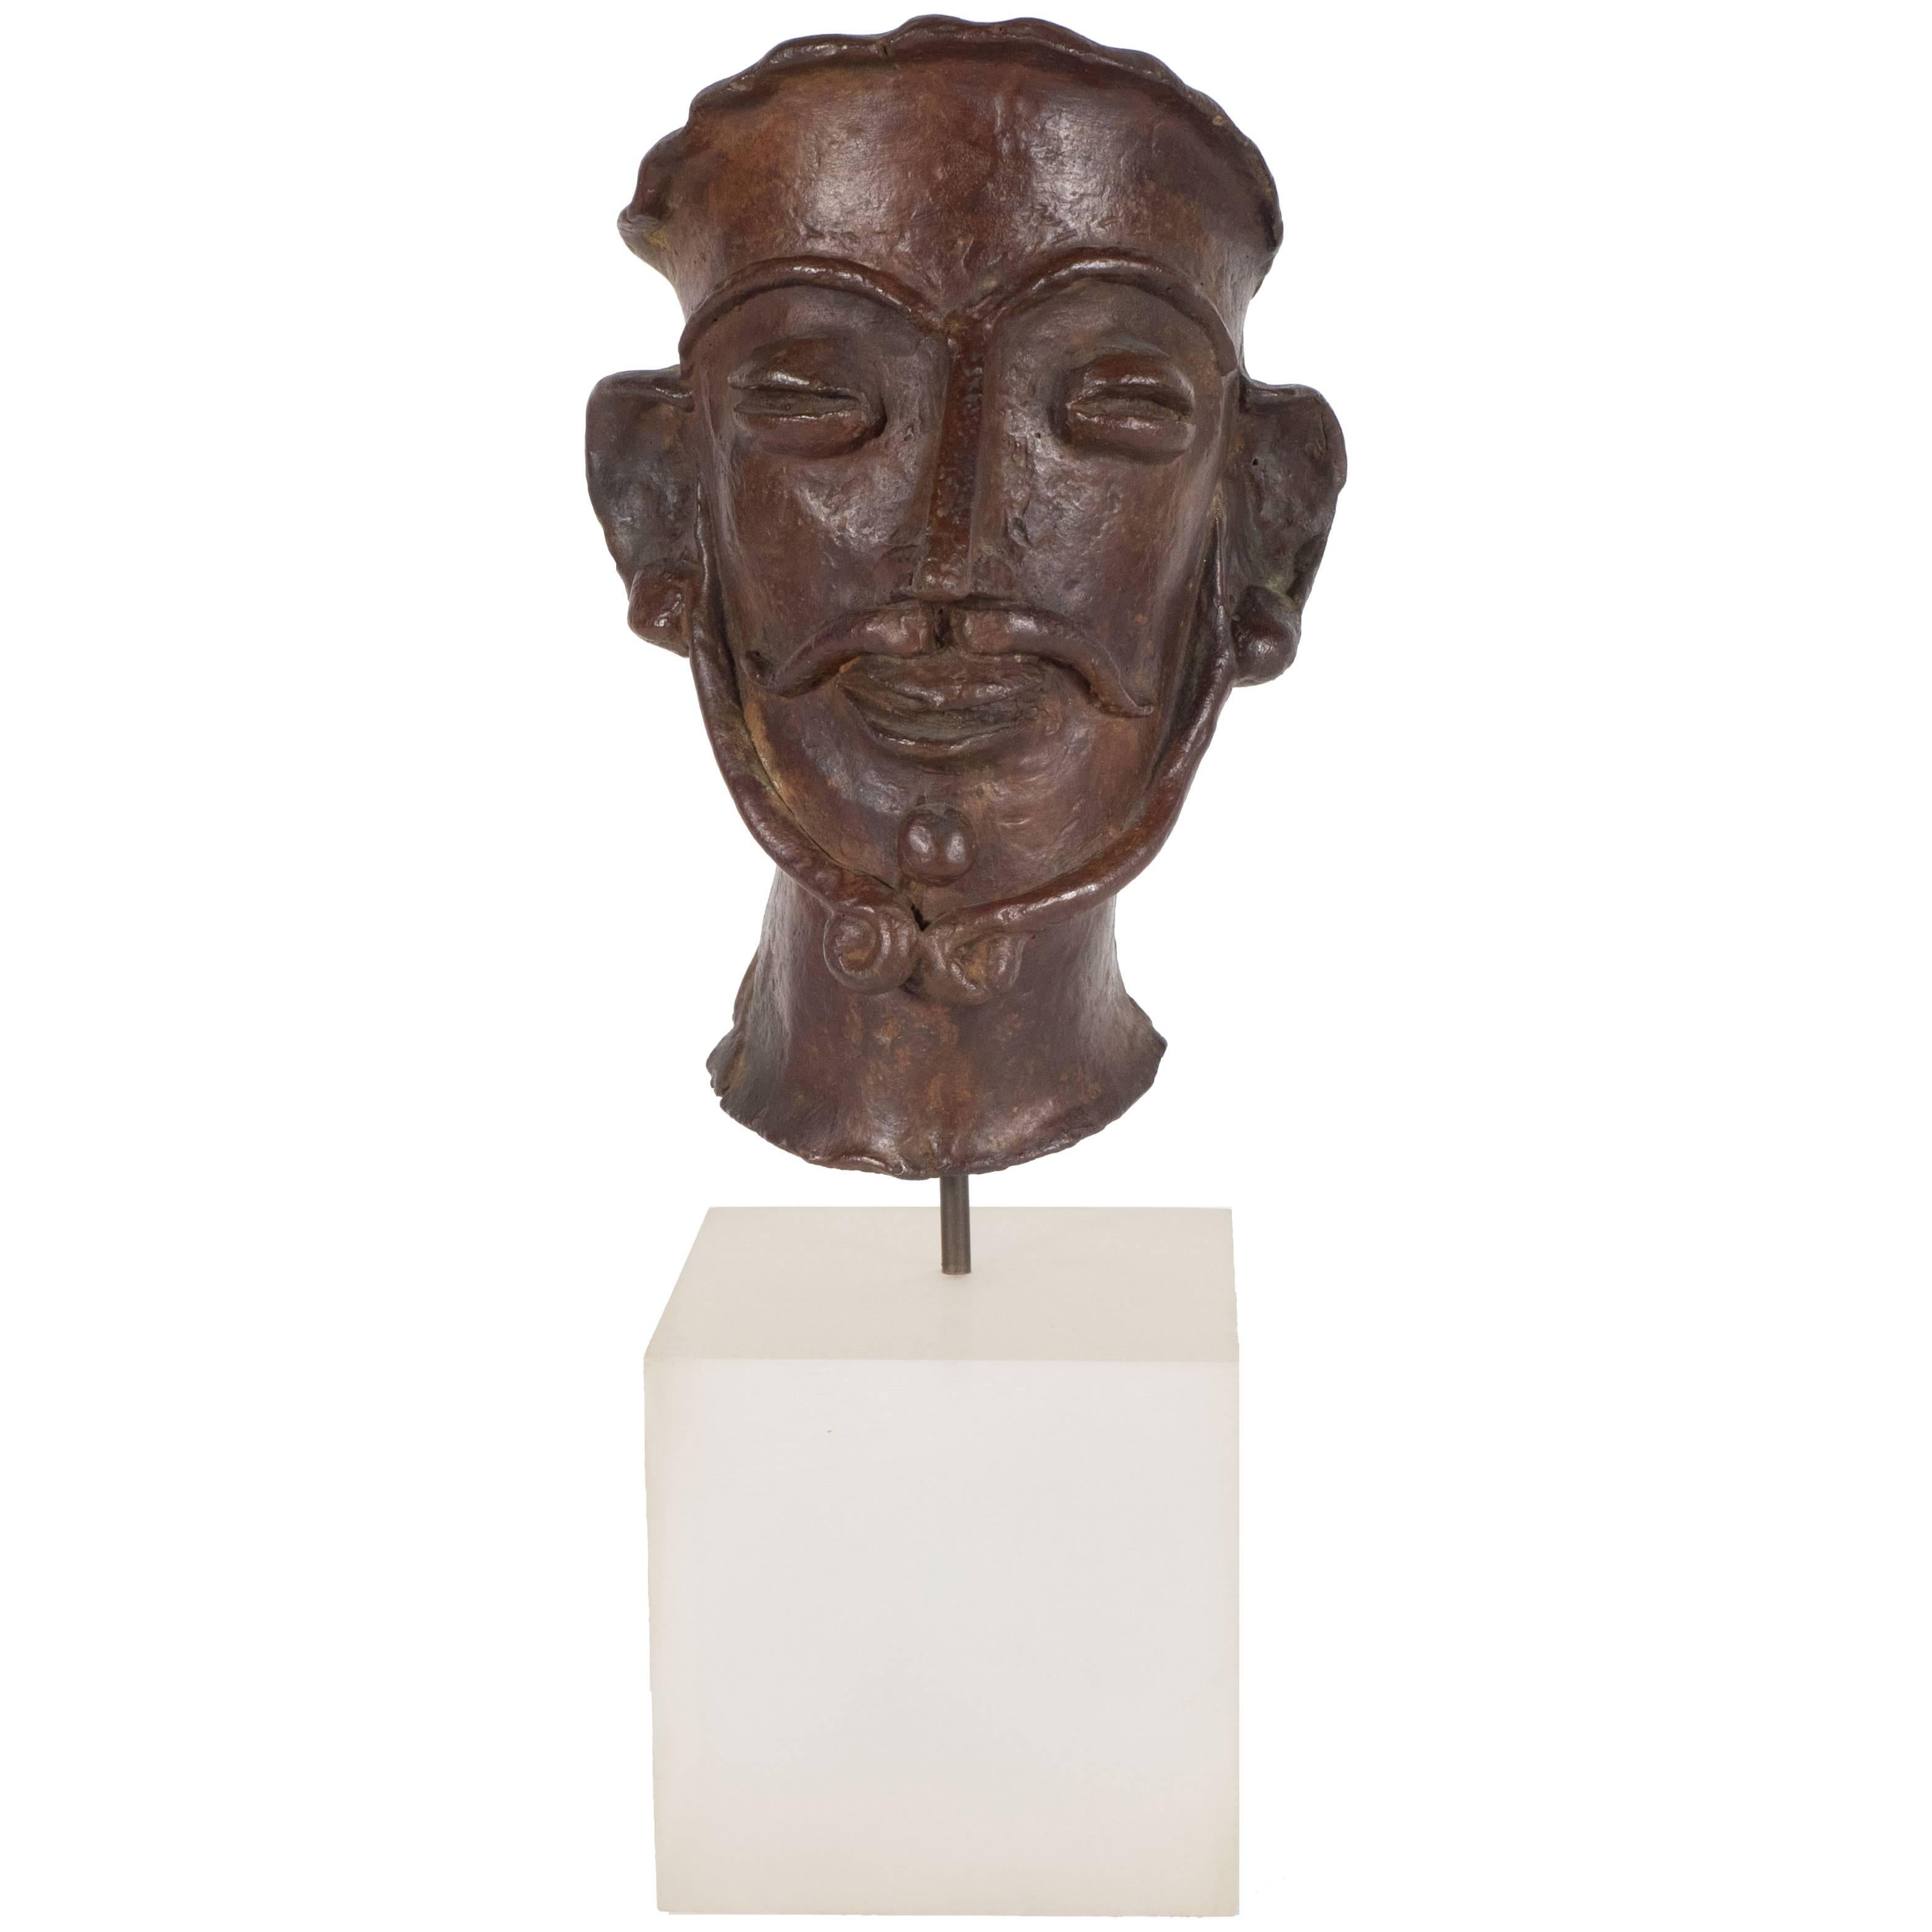 Andre Derain L'Homme aux Favoris Bronze Stamped and Numbered 10/15